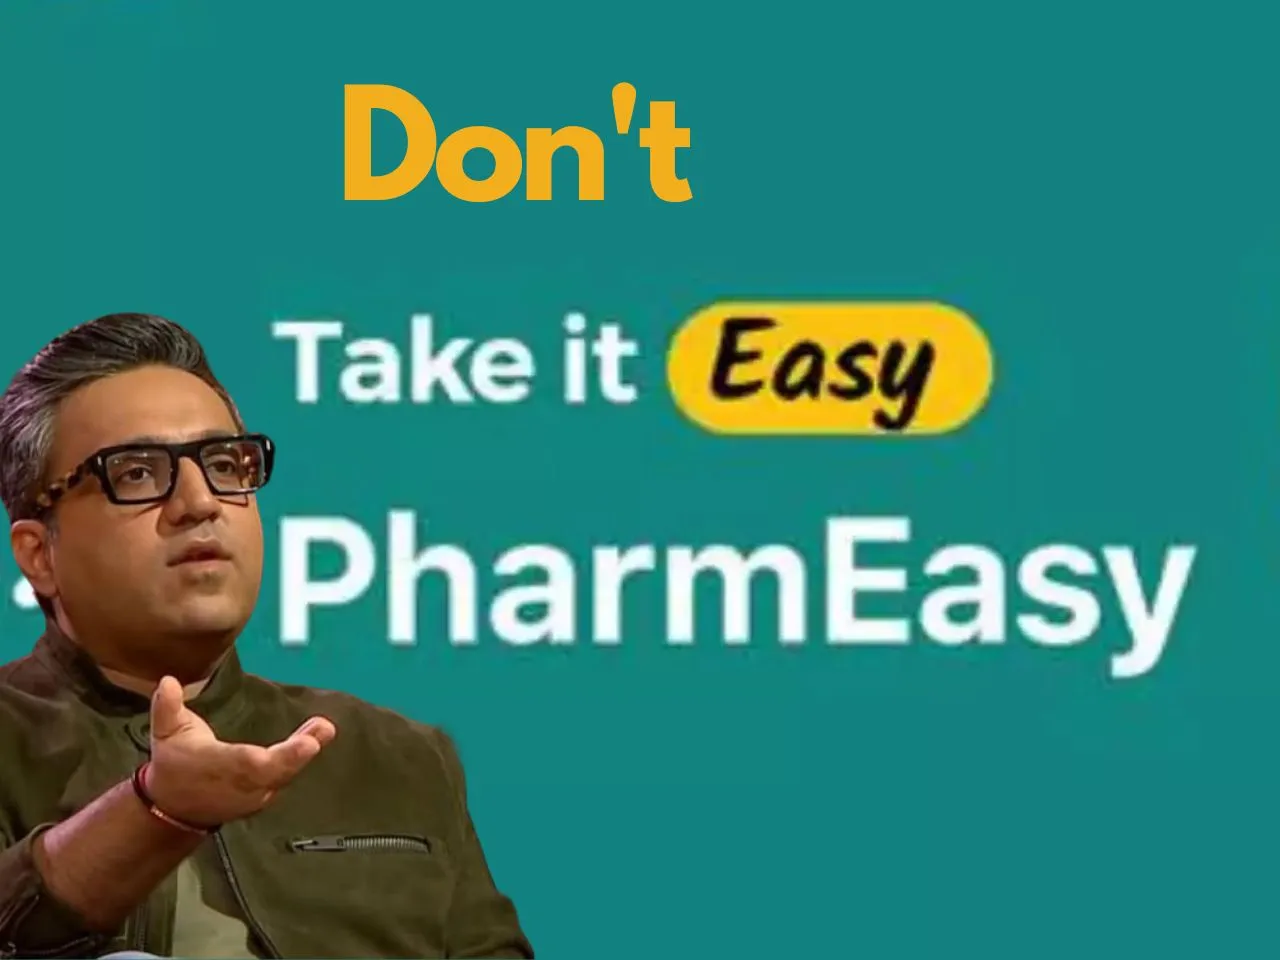 Not Easy For PharmEasy: A Check-Mate Situation For Indian Unicorn